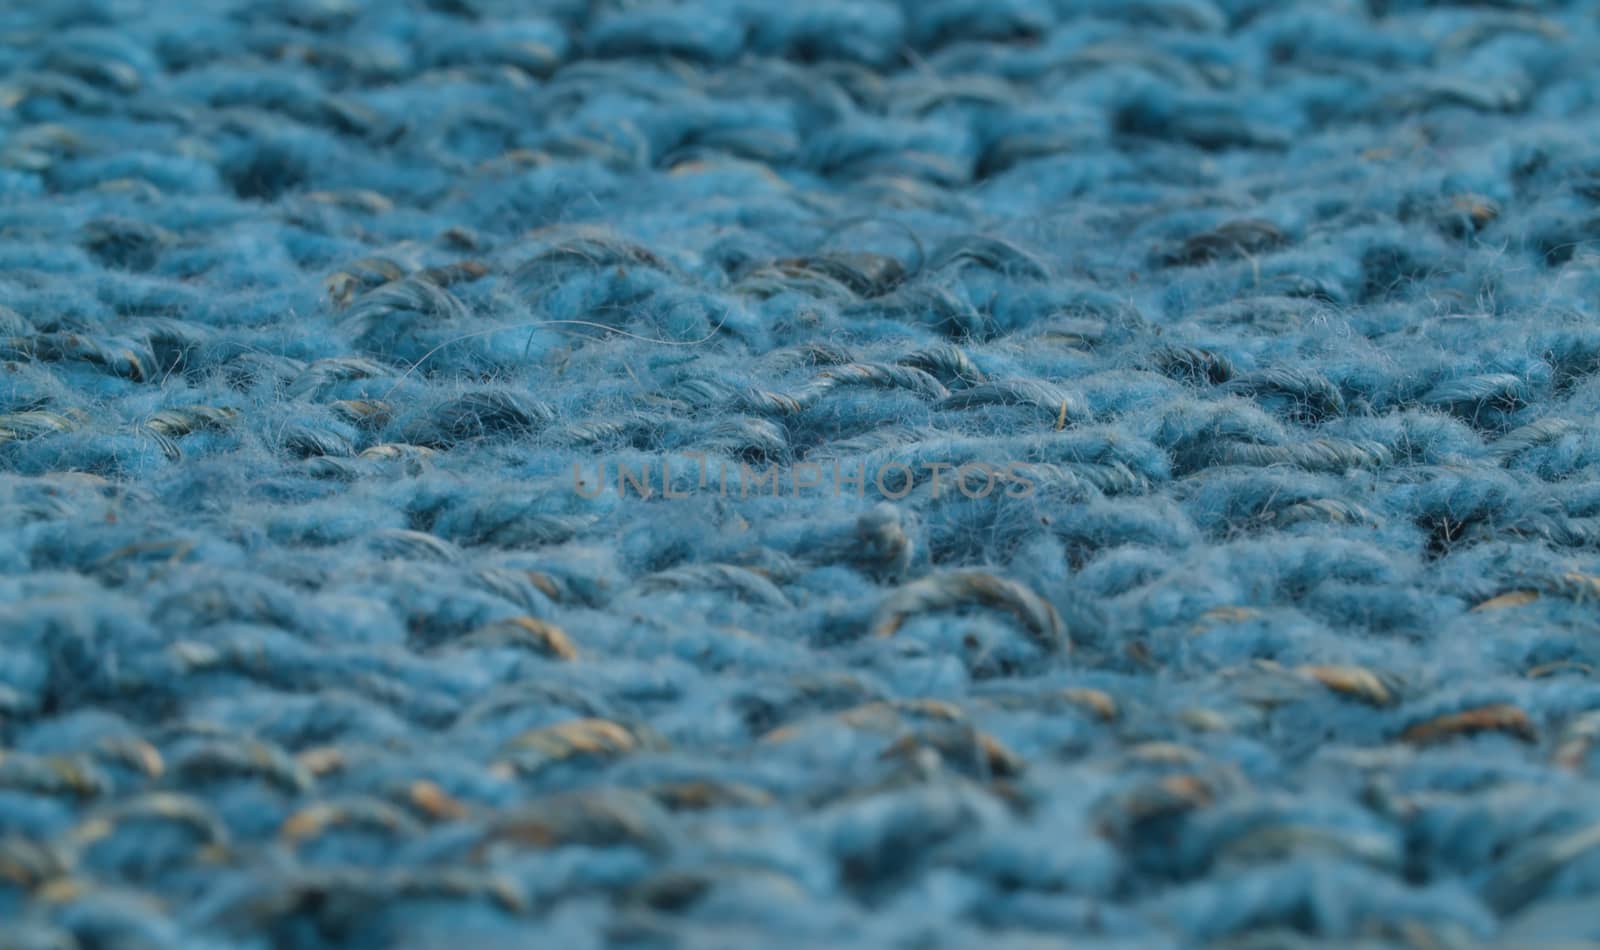 Extreme close up blue wool knitted fabric. Texture, textile background. Macro shooting, camera slowly moving along the cloth on slider.